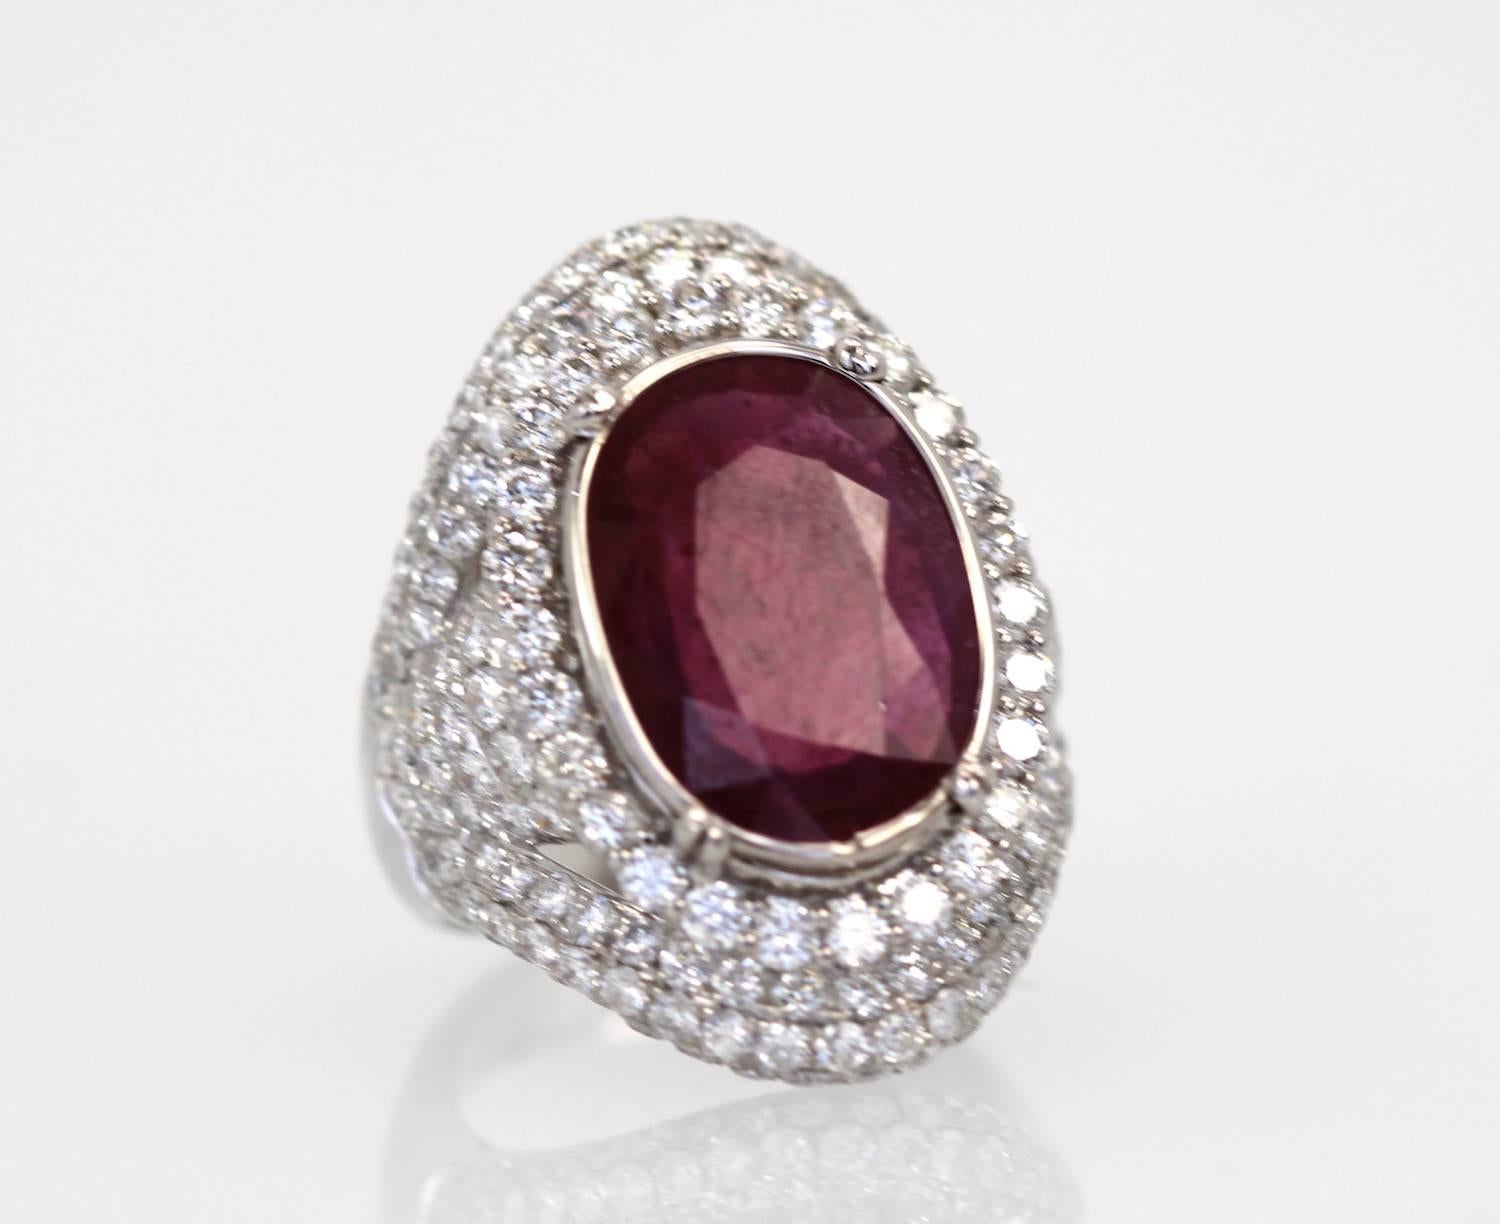 This unusually large, transparent ruby has a very large table with a small depth, so although it is 4.58 carats it presents as an 8 carat stone. As is typical of most rubies sold after 1950, this ruby has lead glass filling which is common, whether